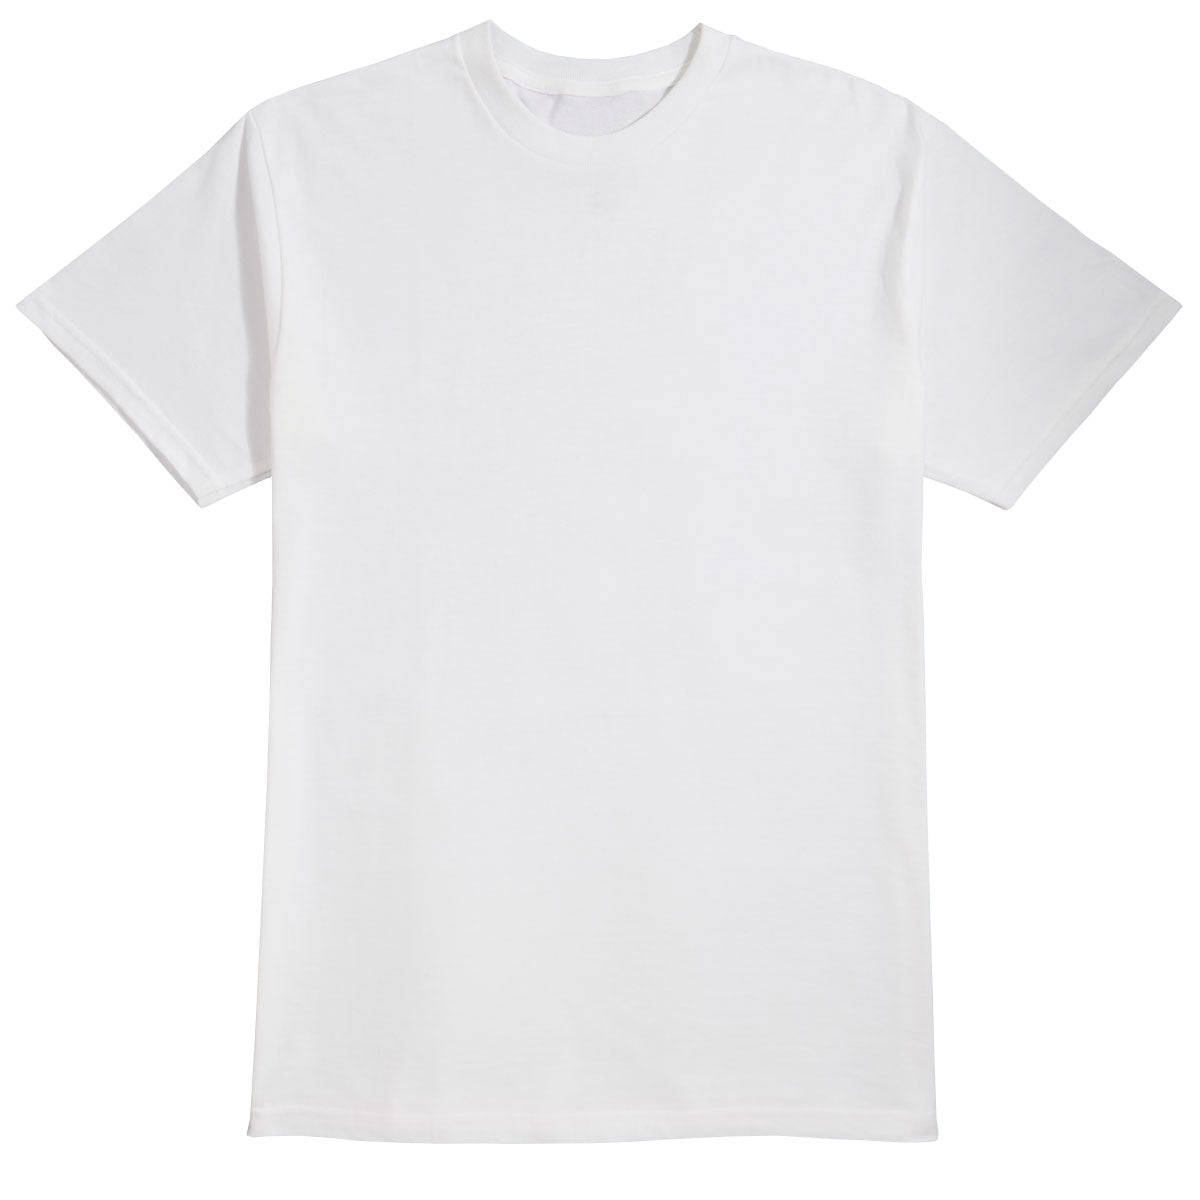 Converse Spider Web T-Shirt - White - MD image 1